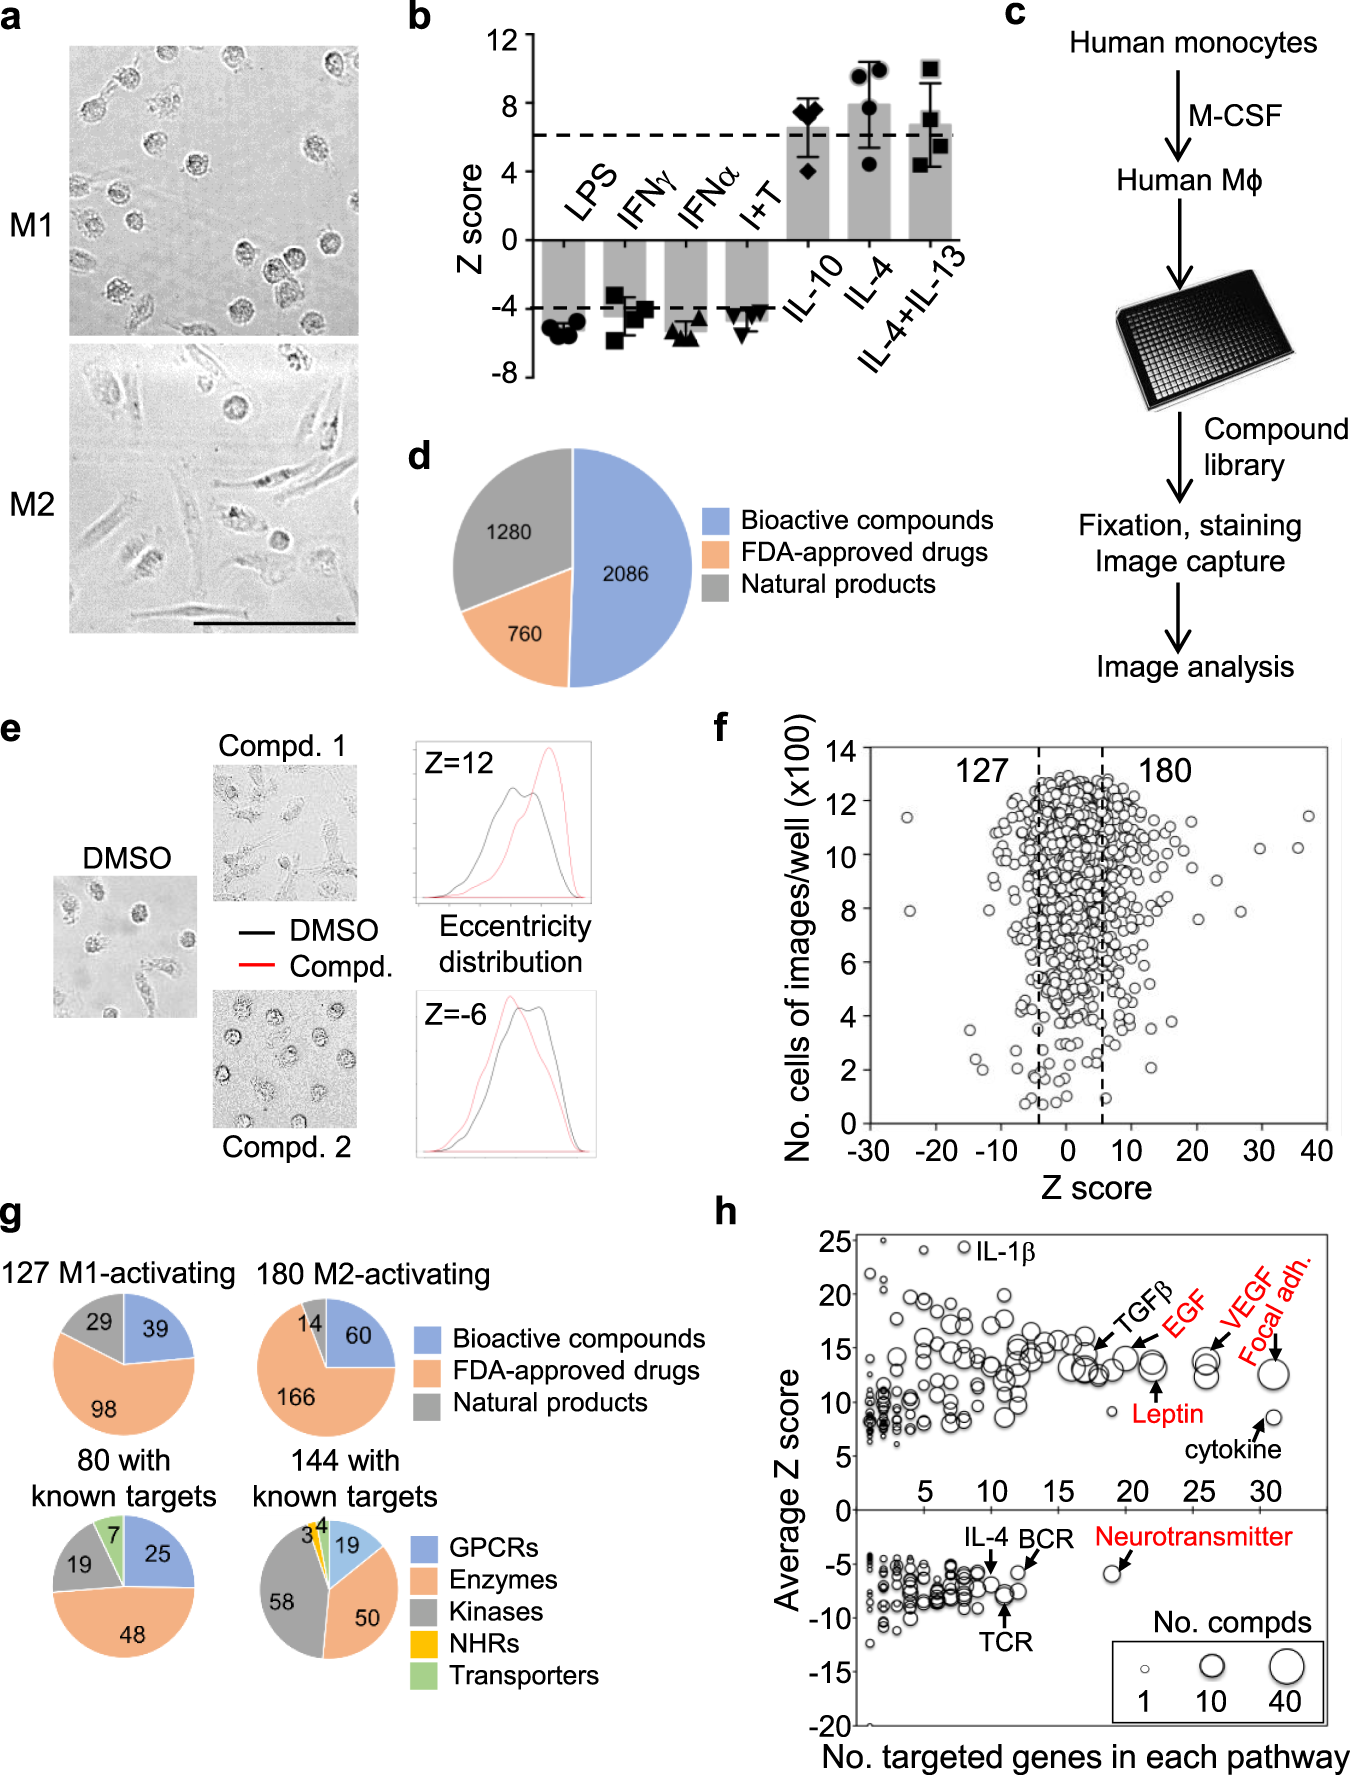 High-throughput phenotypic screen and transcriptional analysis identify new  compounds and targets for macrophage reprogramming | Nature Communications